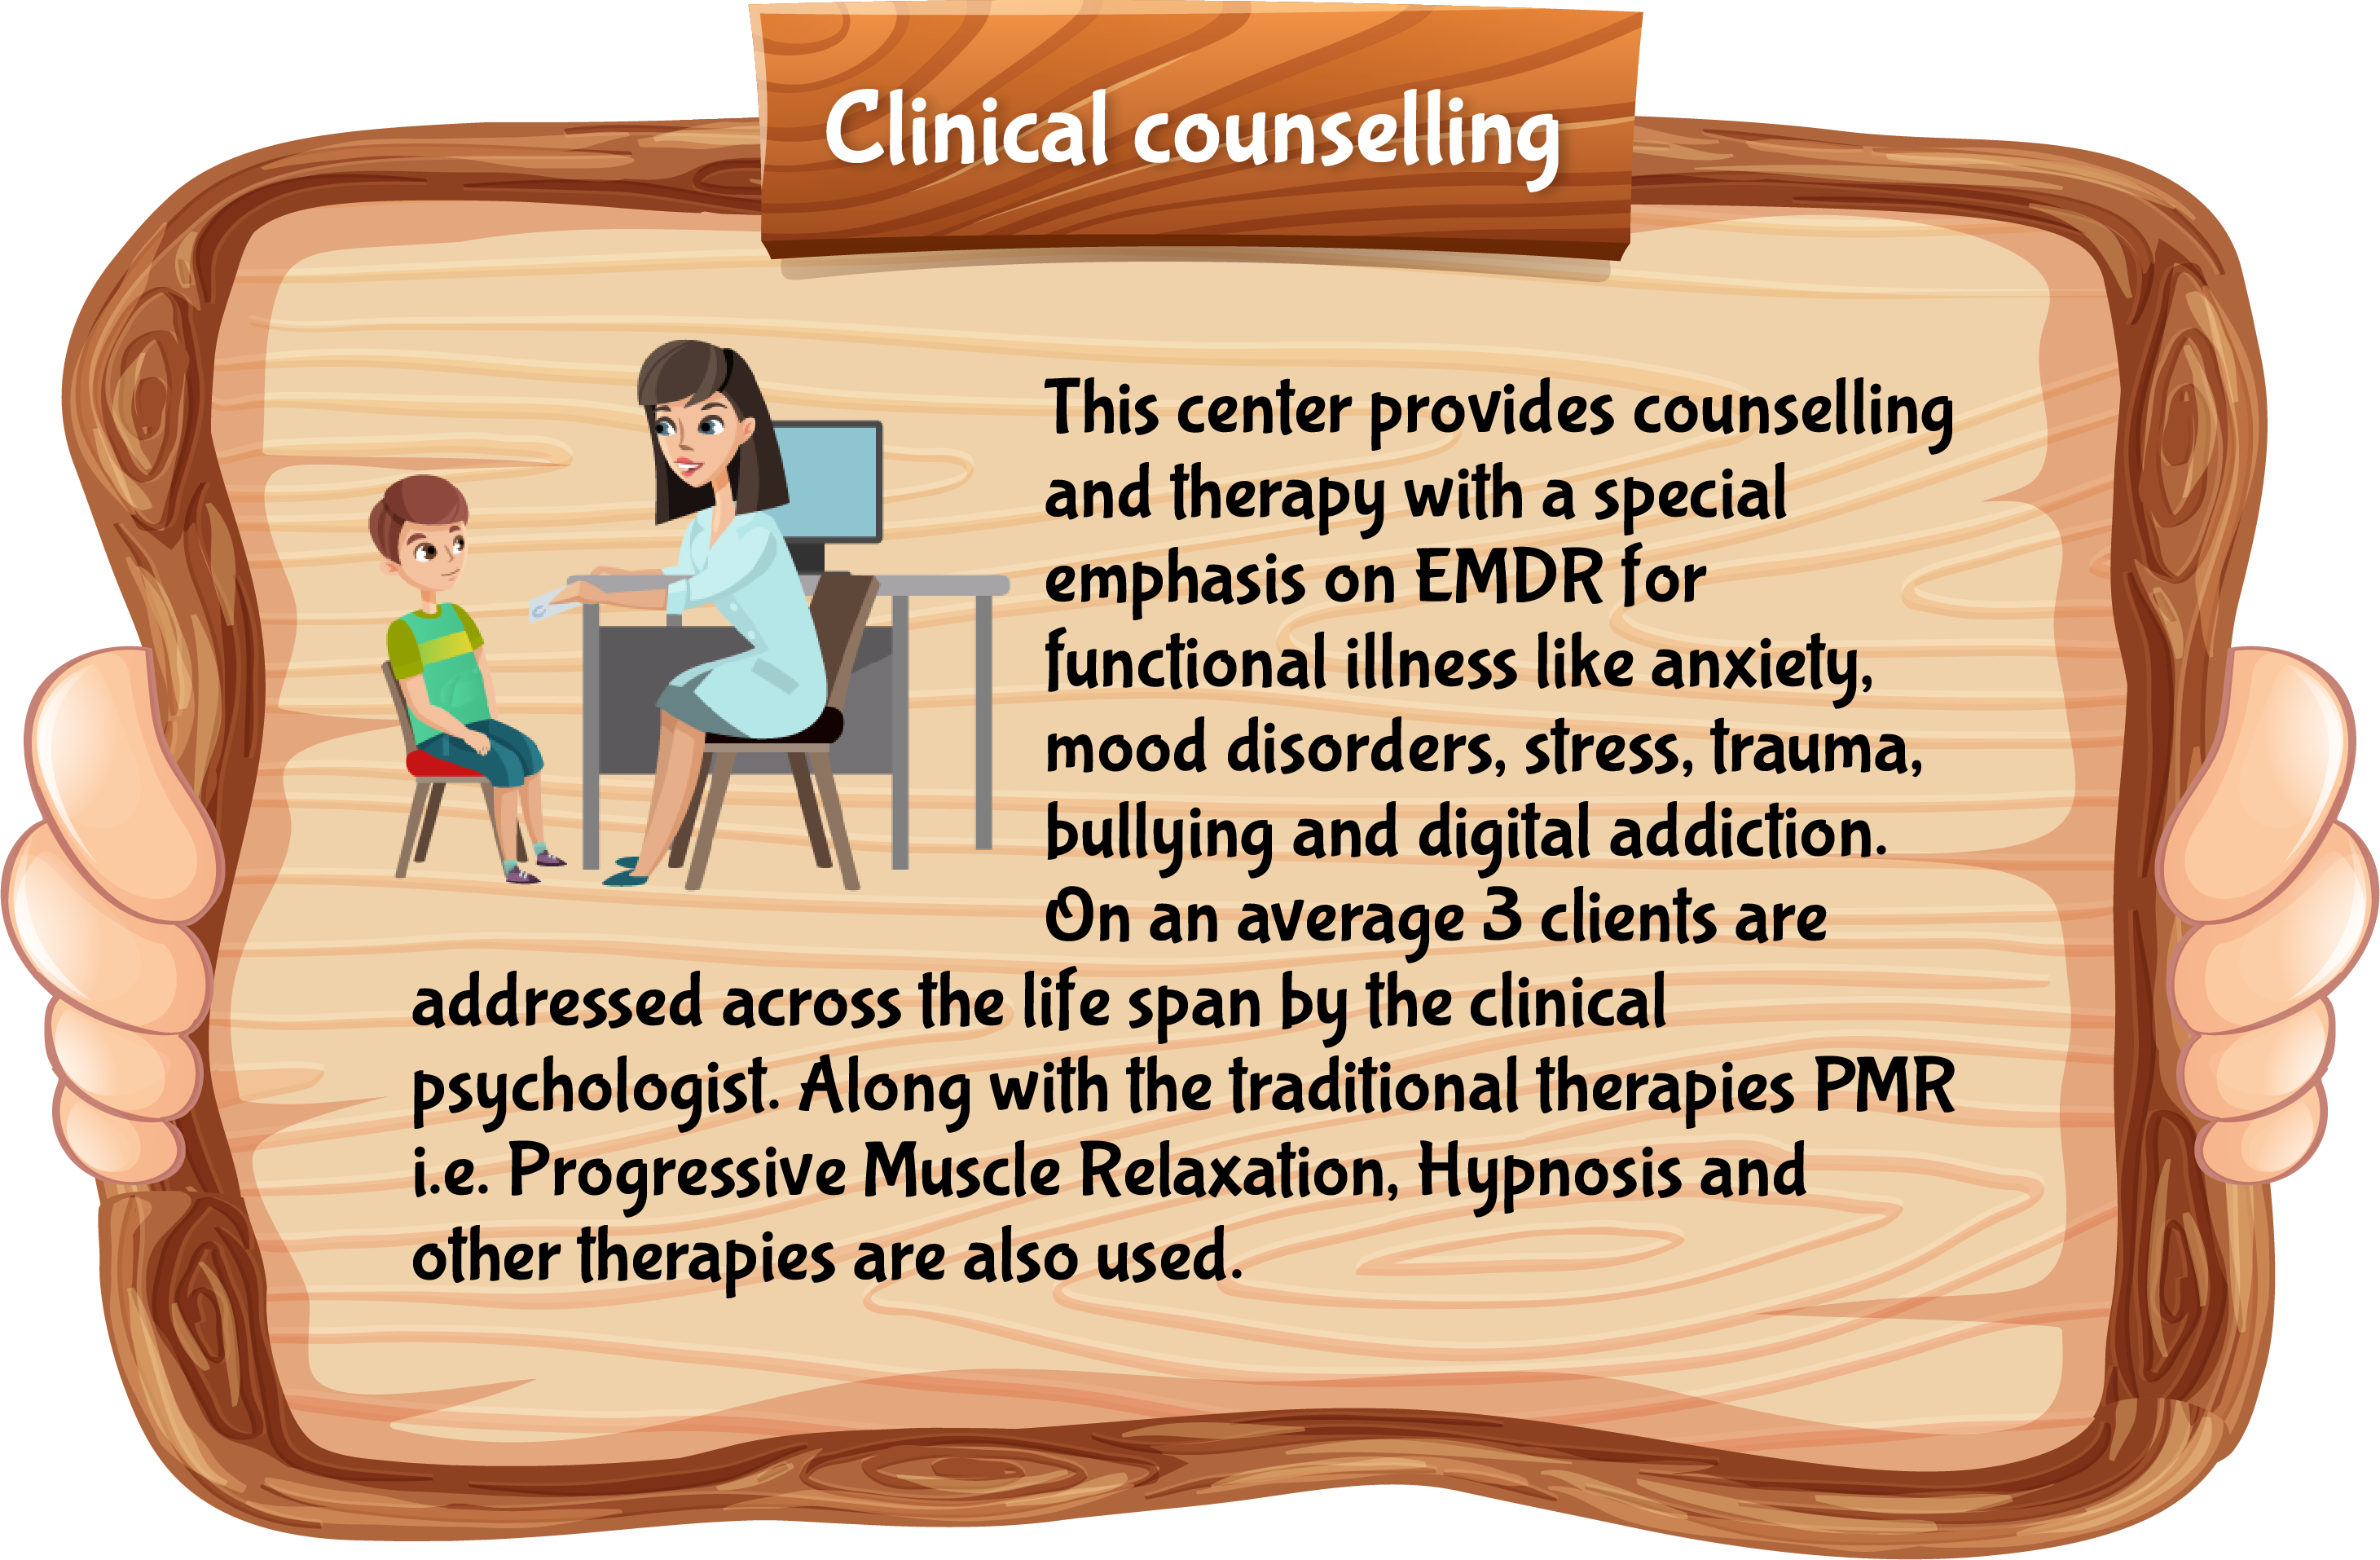 ClinicalCounselling